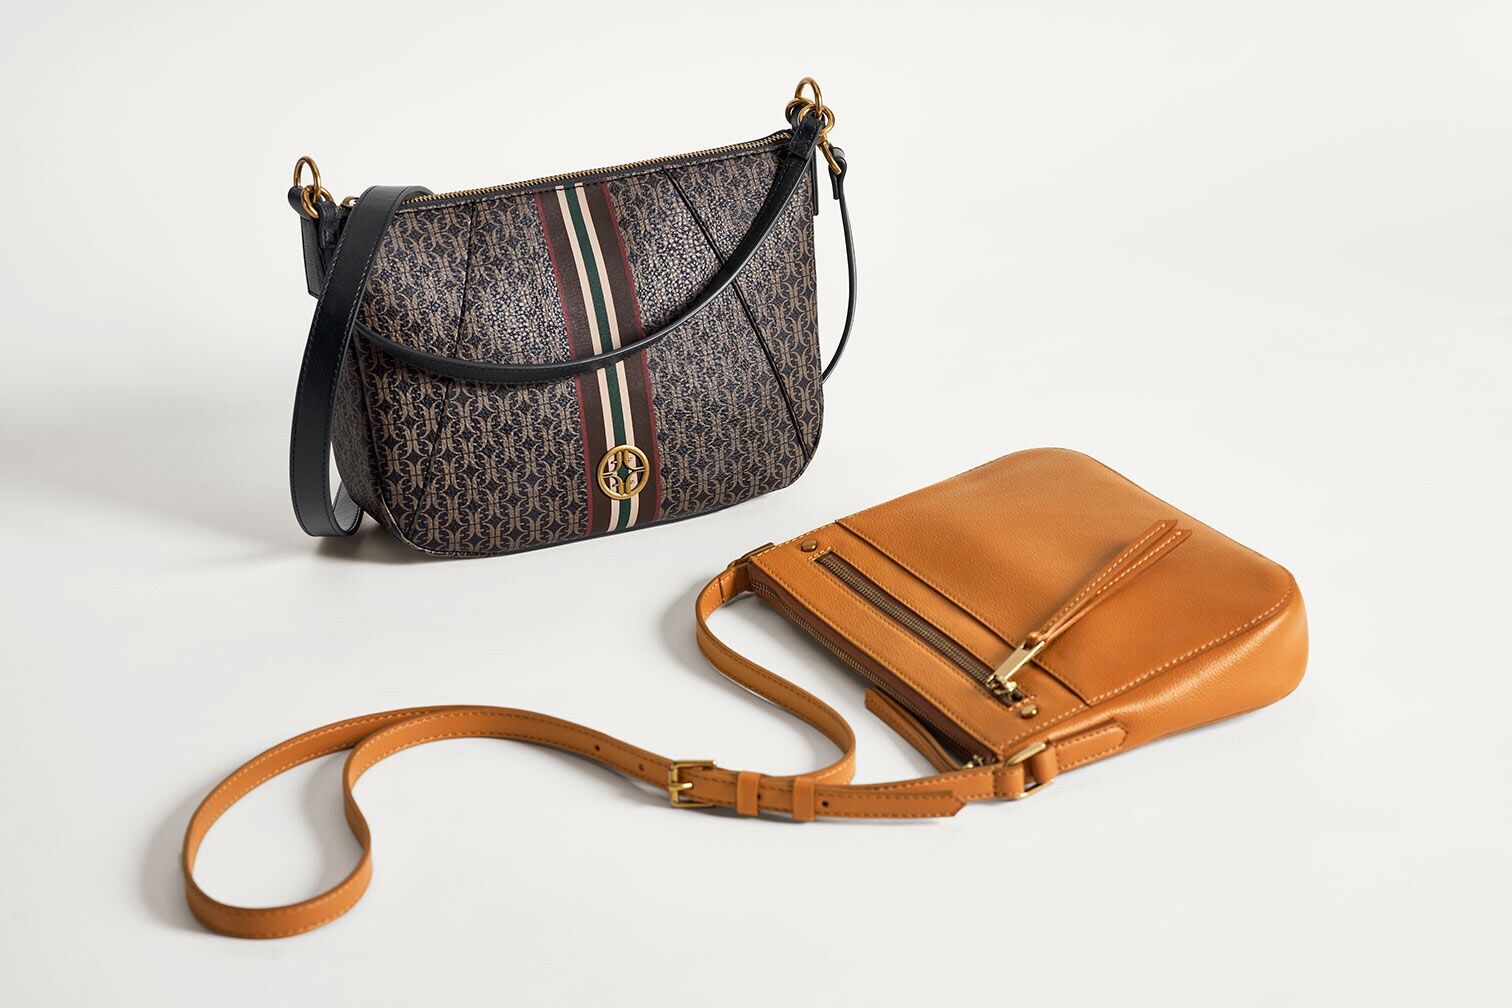 Two Fossil women's leather handbags in brown and black colorways.